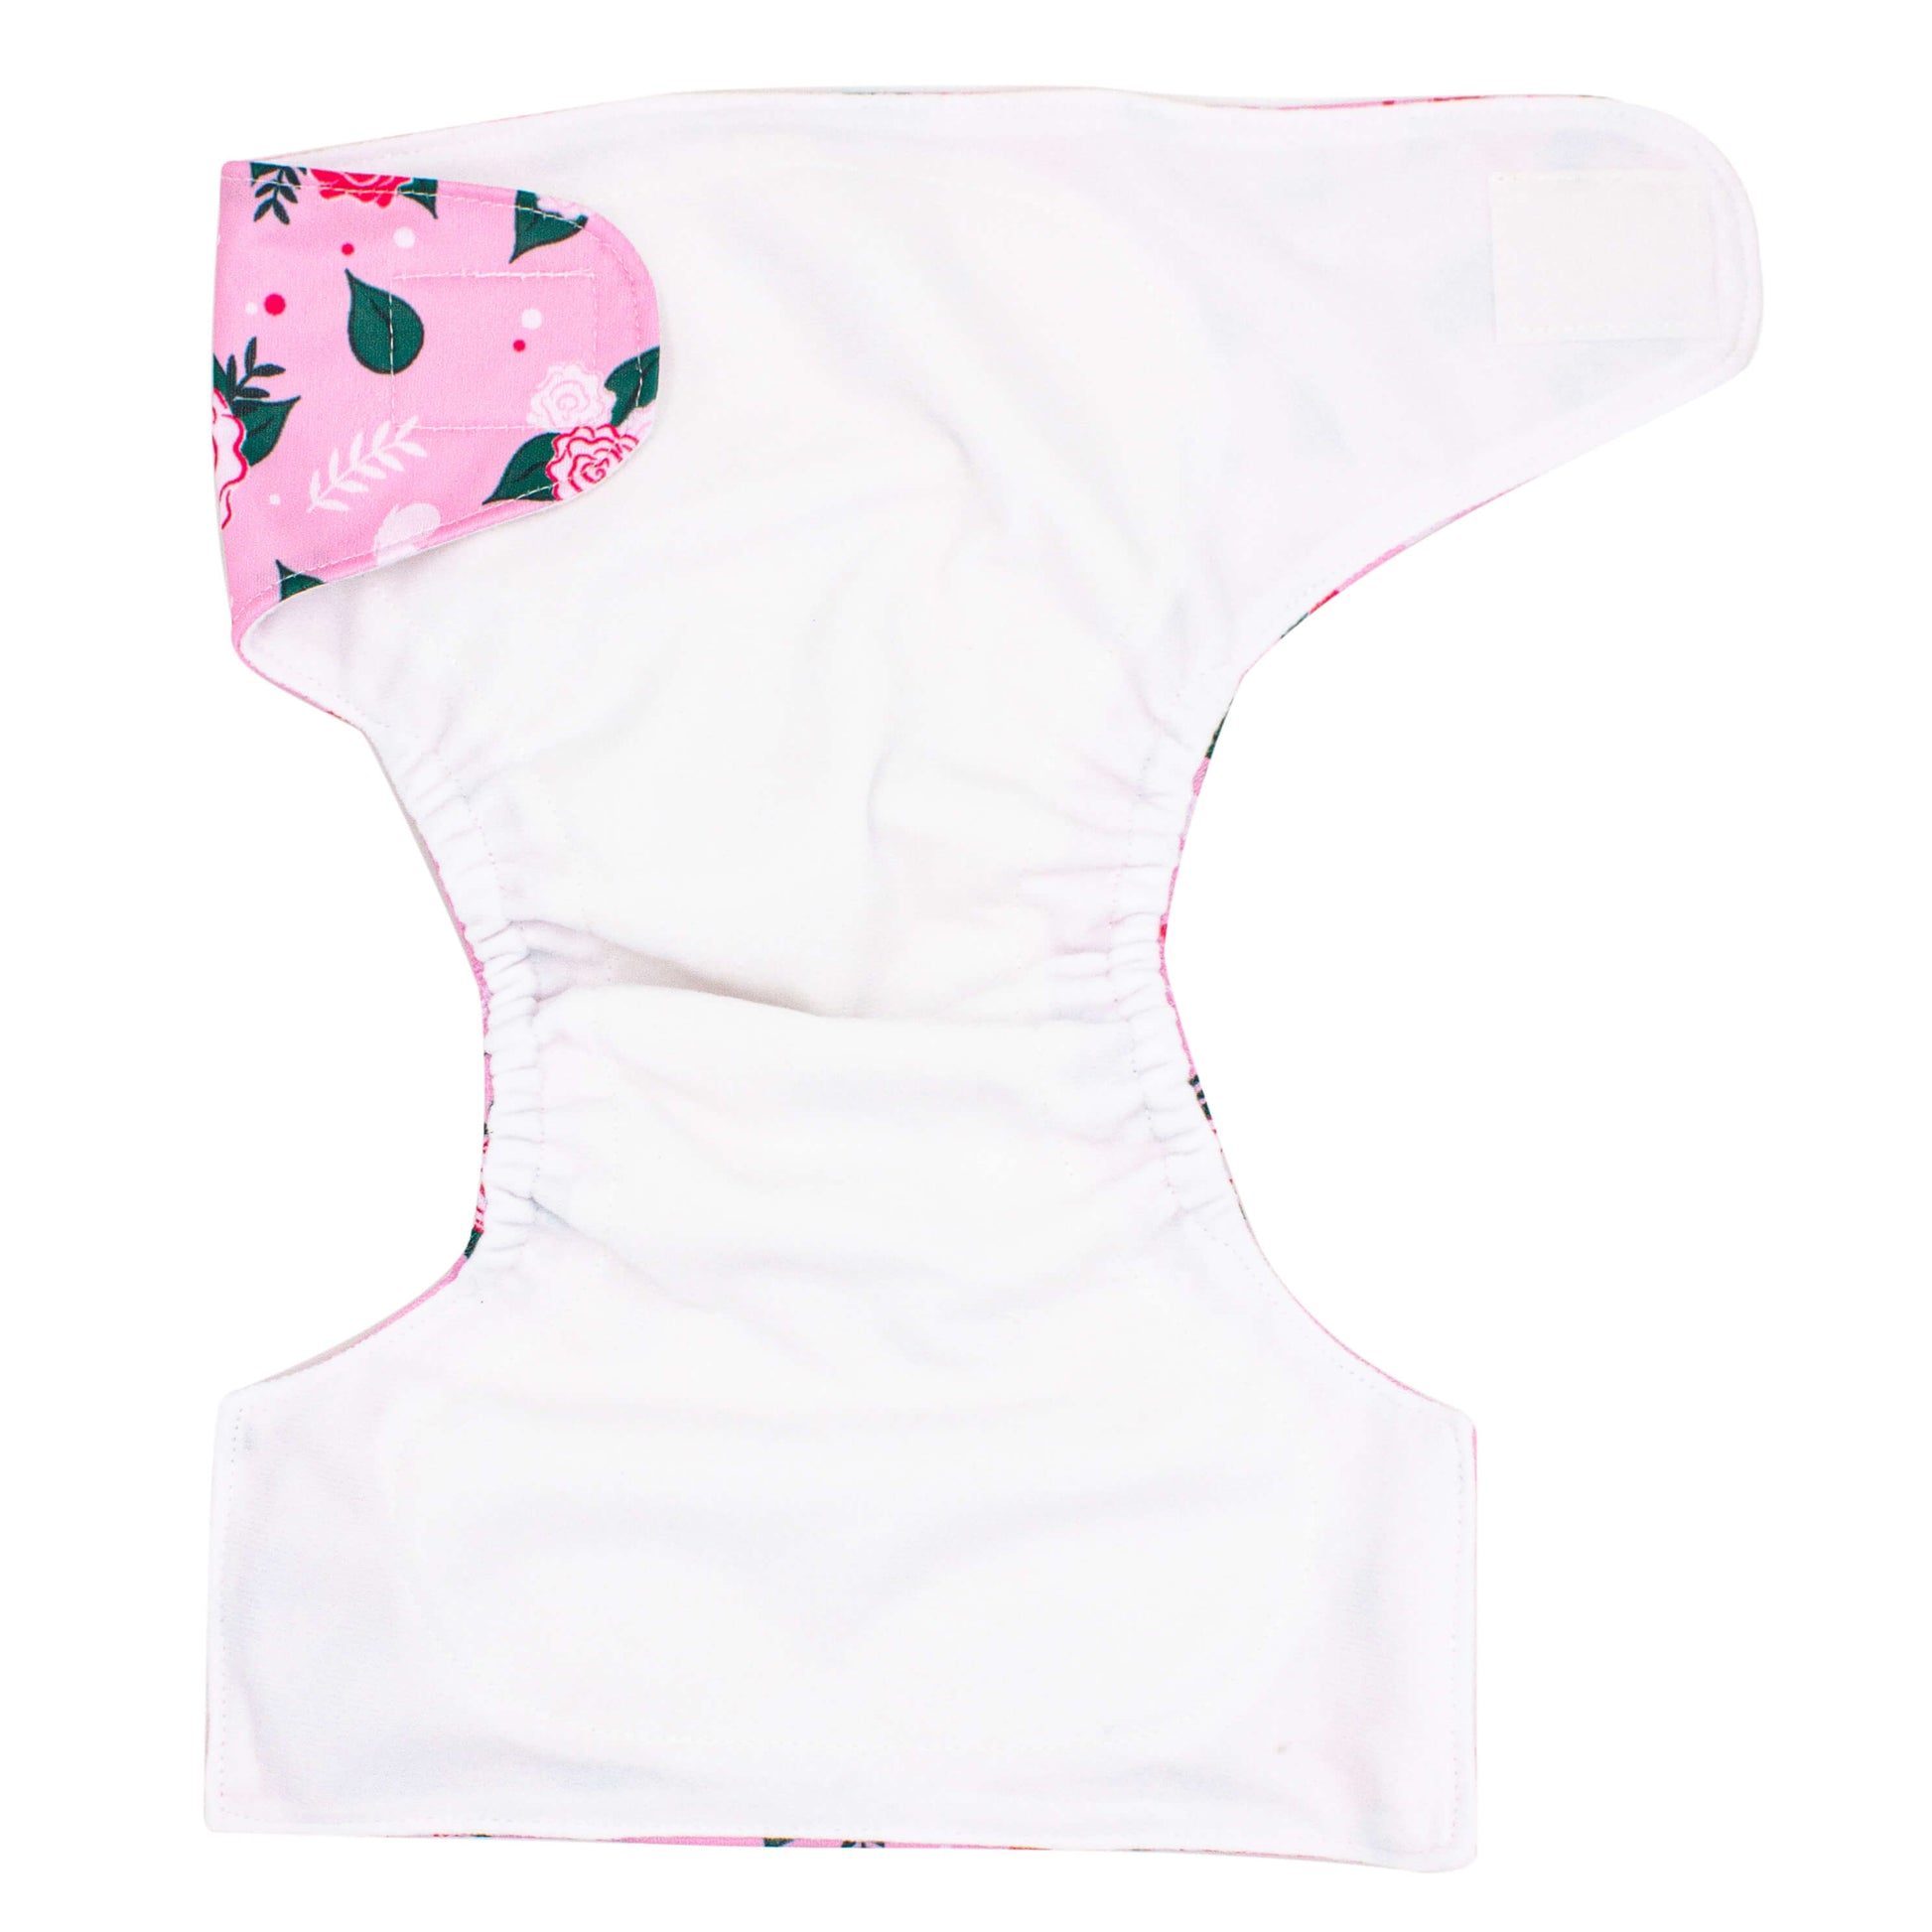 Couche lavable 4-8 mois - Roses Babycalin - BB Malin